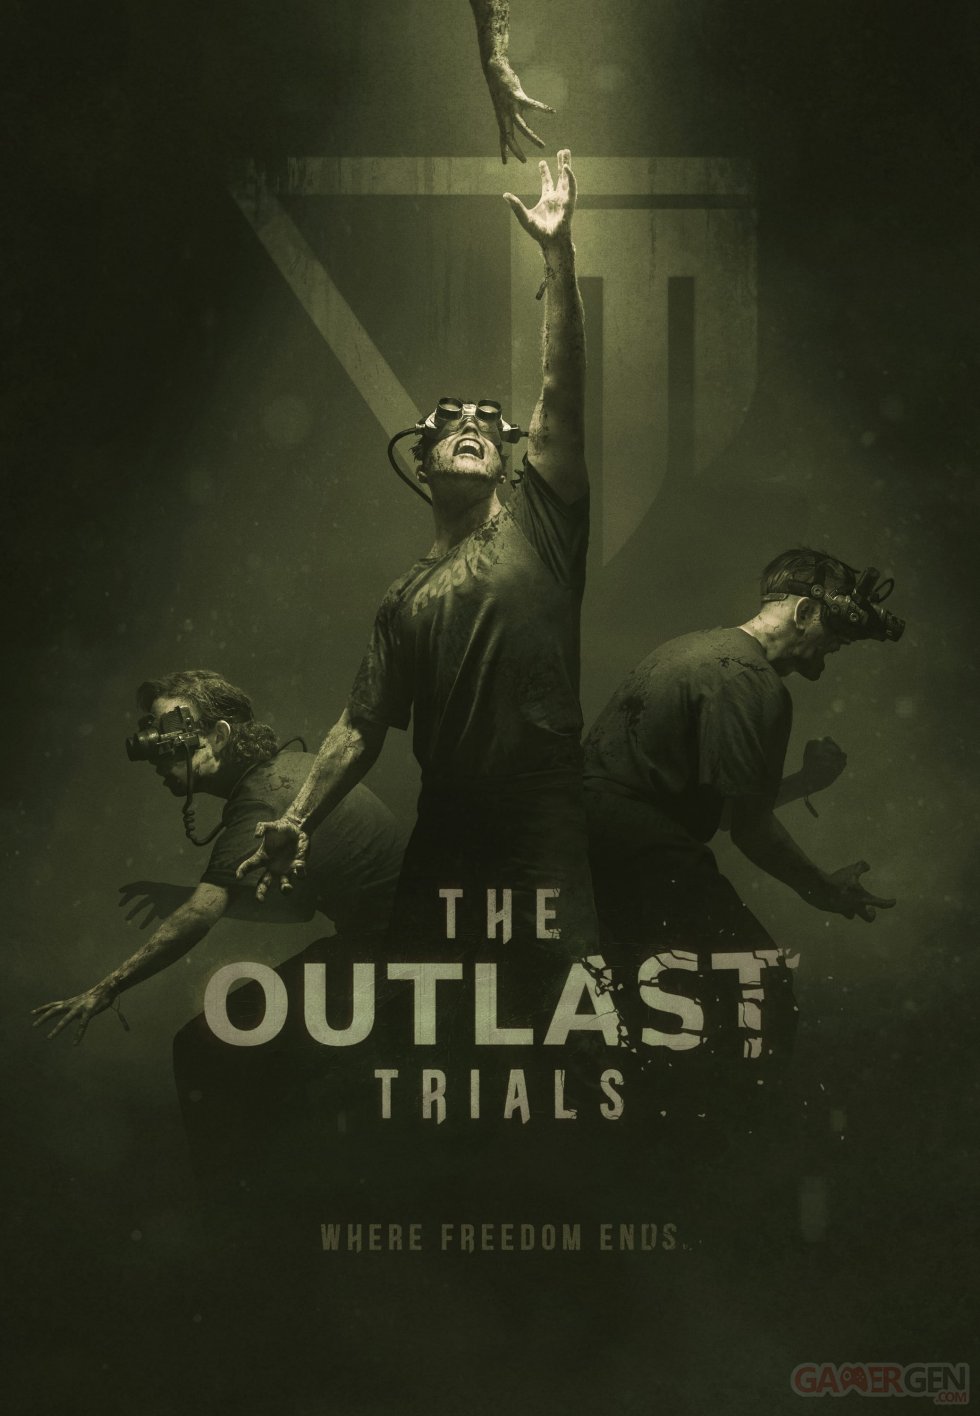 The Outlast Trials Affiche Poster